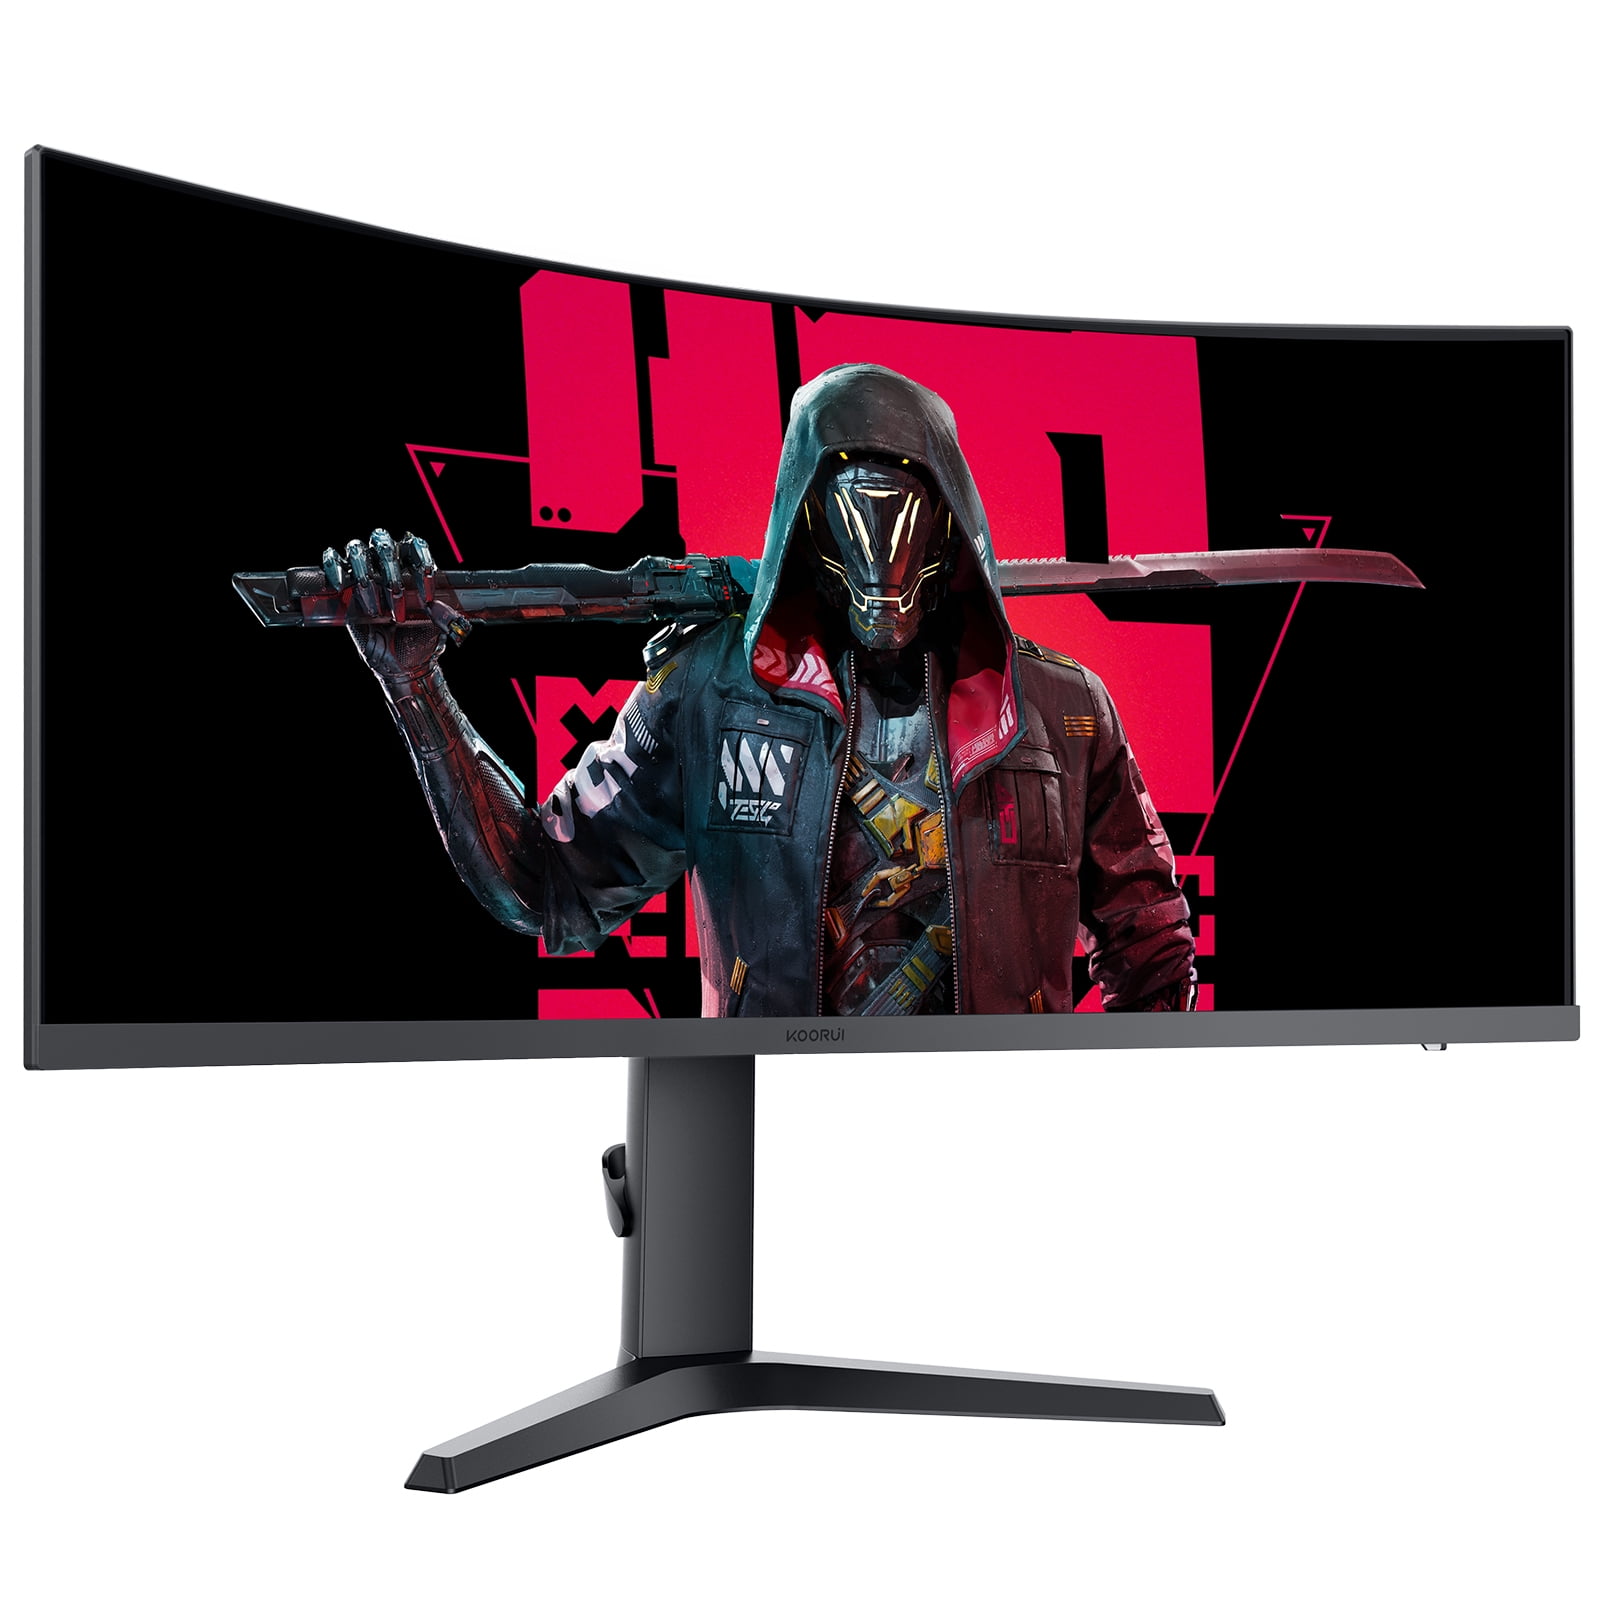 Remember to enter if you wanna win! #winner #gaming #gamers #val #valo, koorui 24 inch monitor